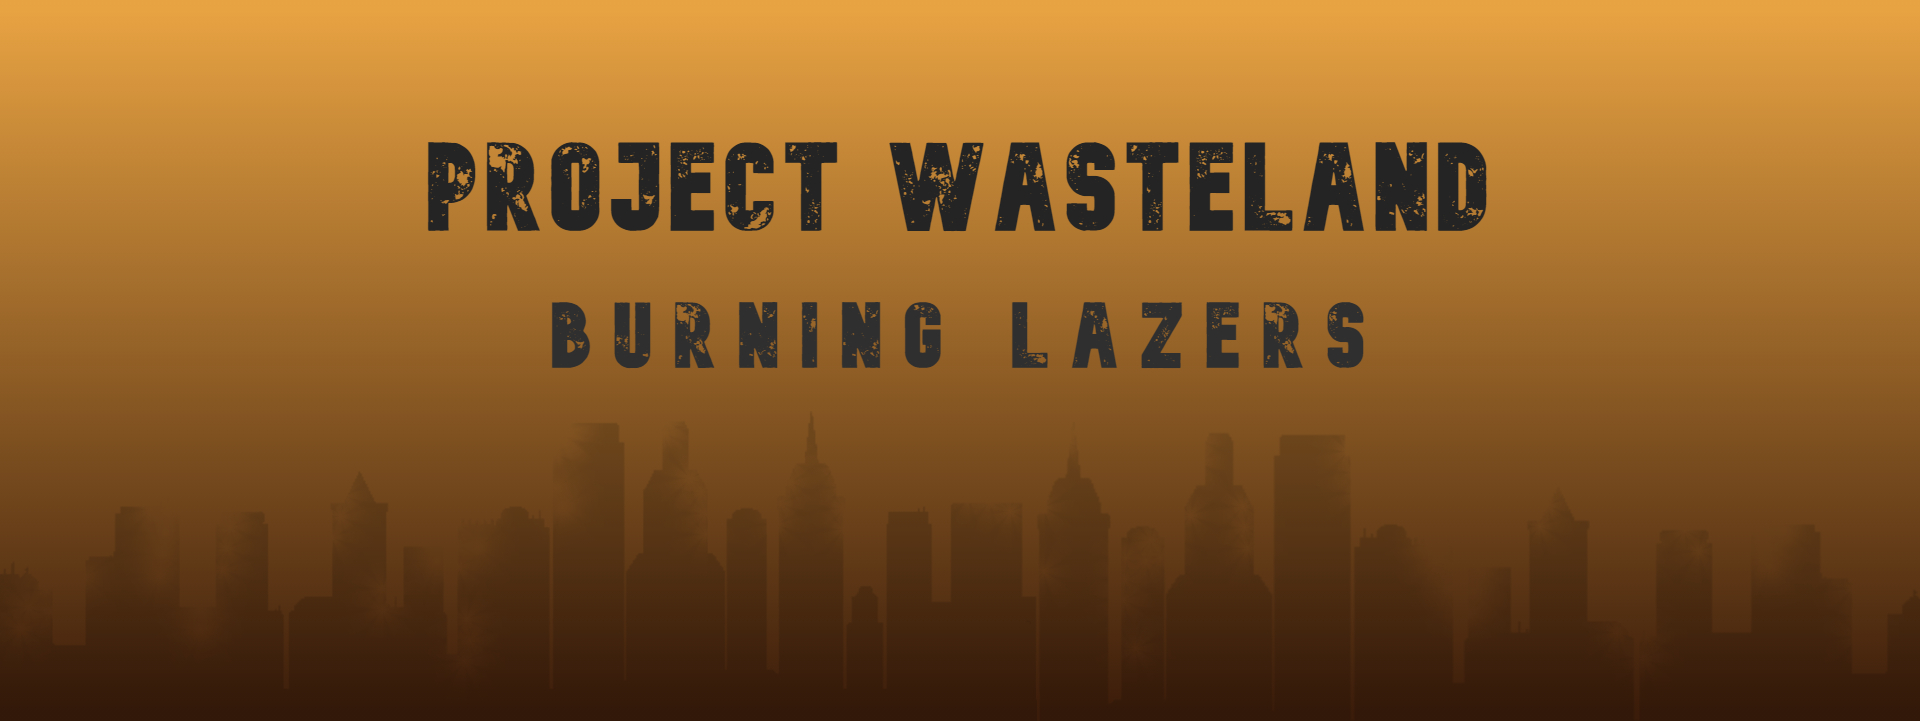 Project Wasteland